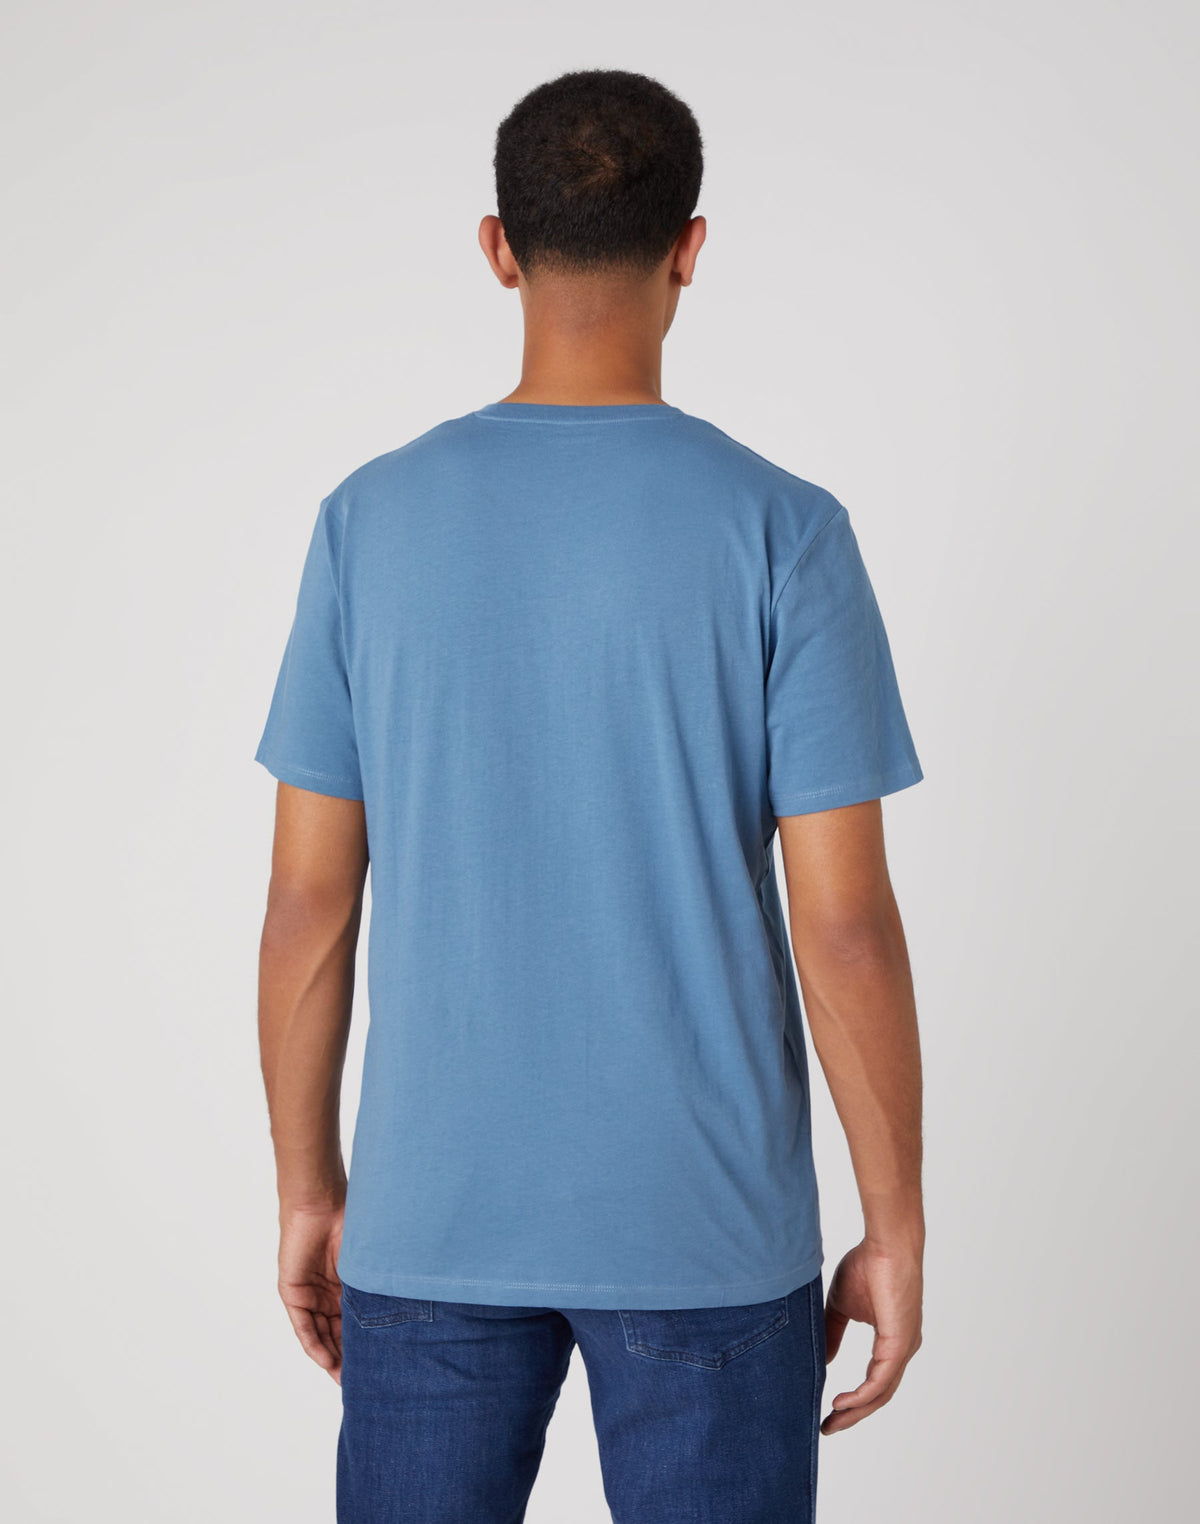 Sign Off Tee in Captains Blue